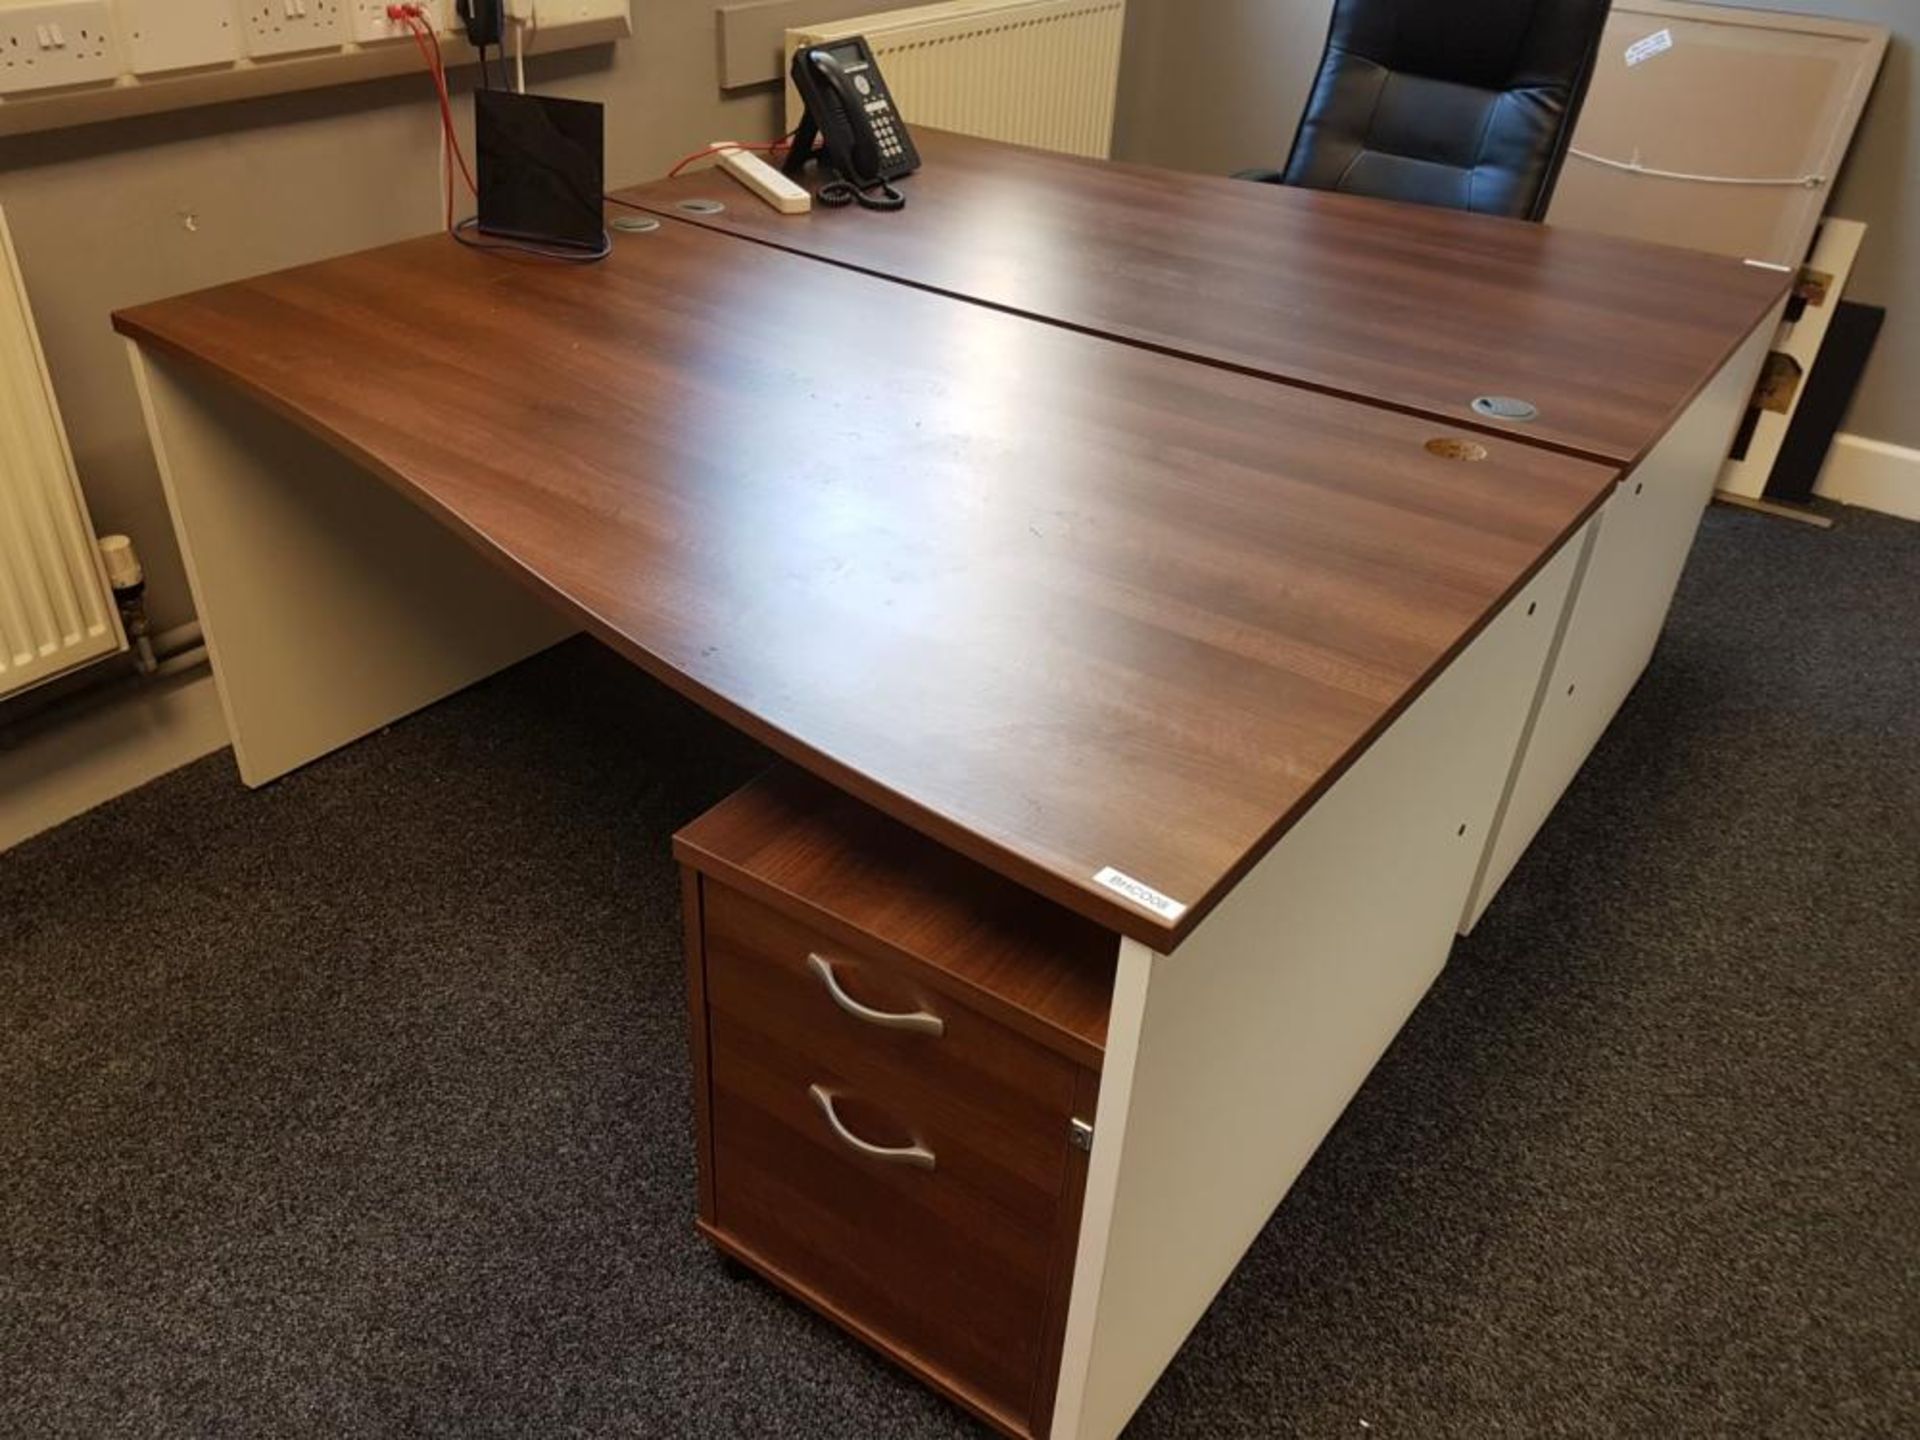 1 x Contemporary Wave Right Hand Office Desk - Walnut Finish With White Panelled Legs - Heat and